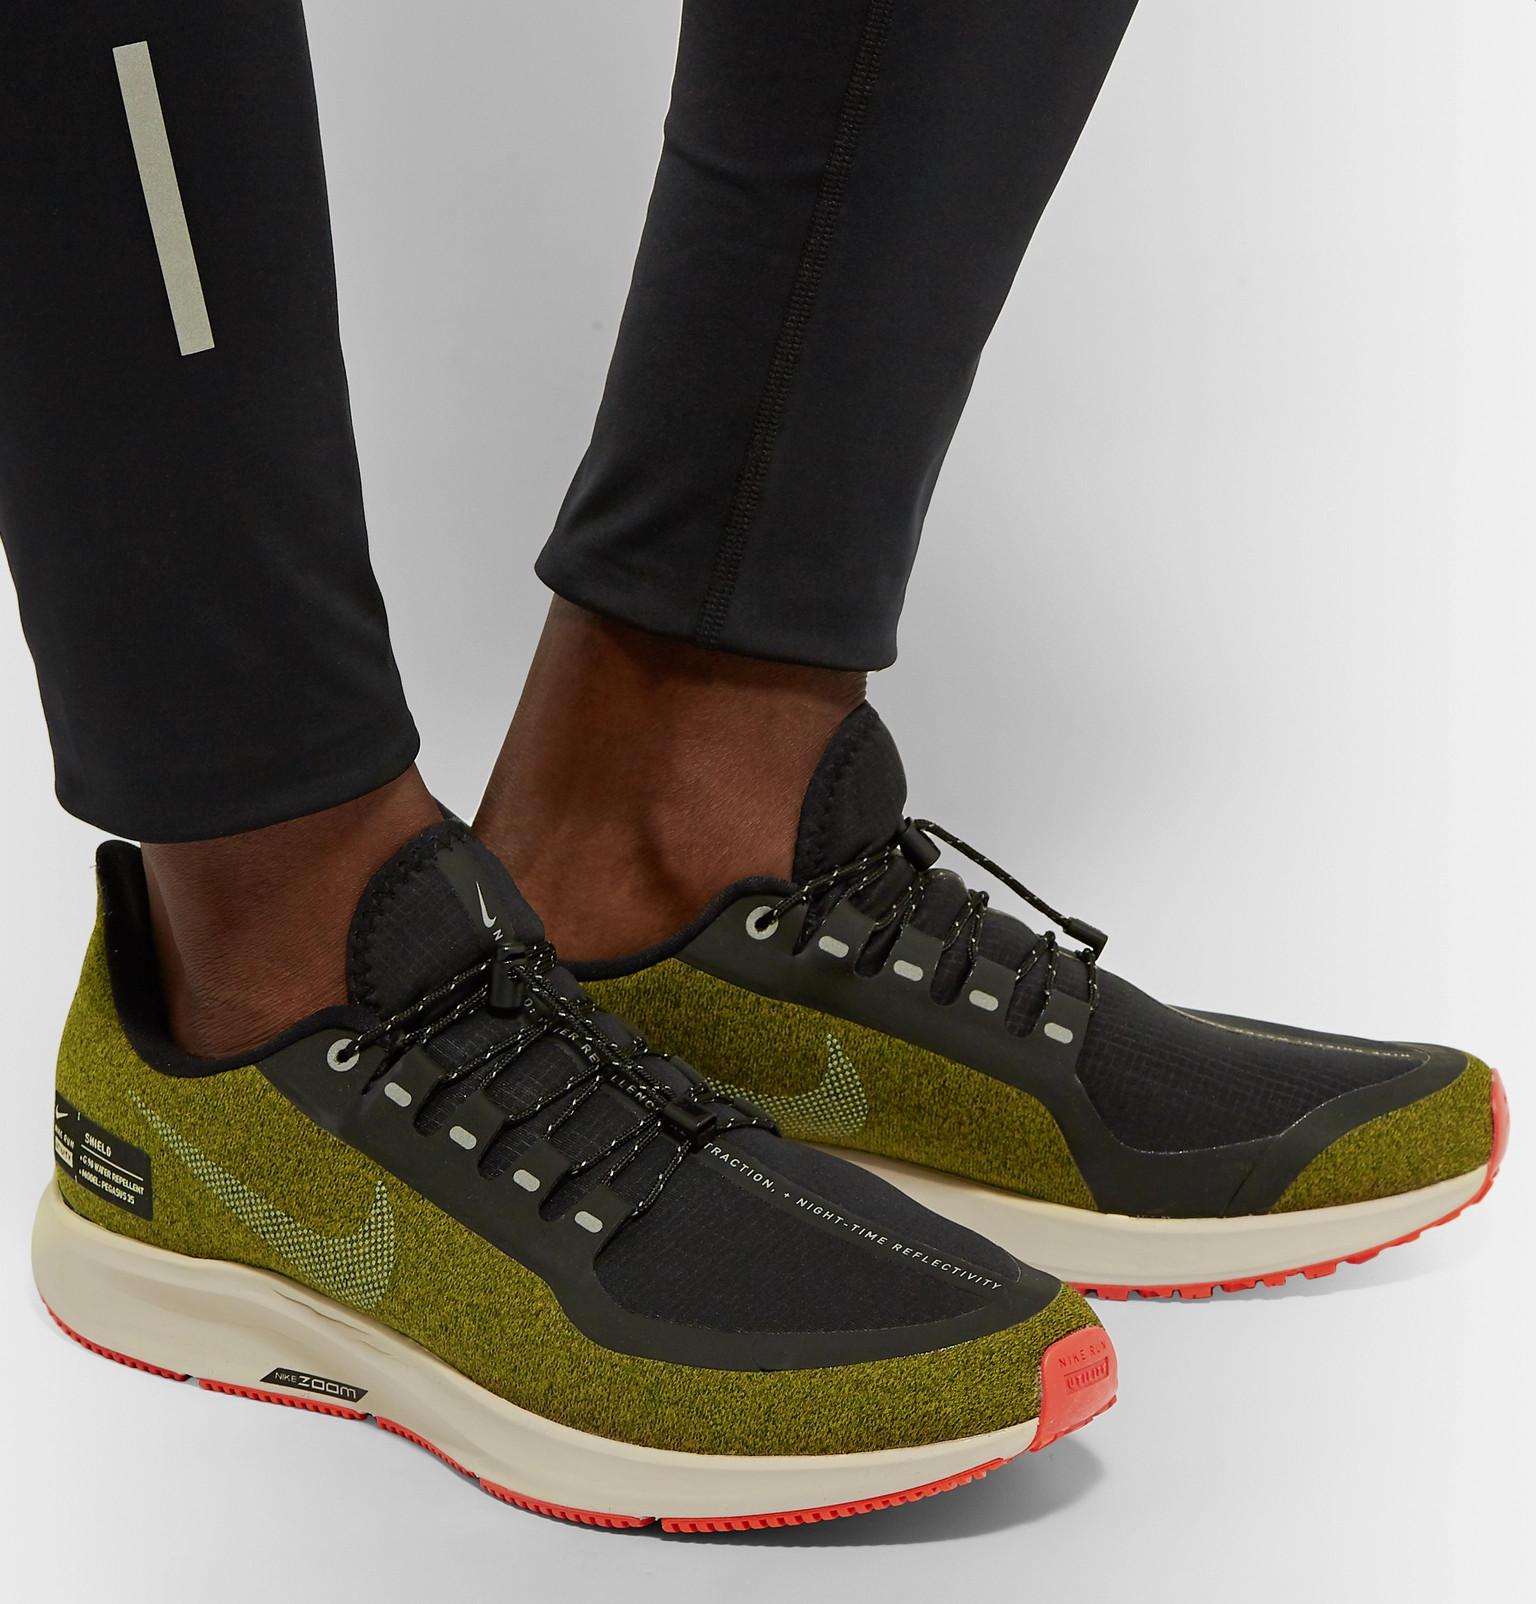 Nike Air Zoom Pegasus 35 Shield Green Finland, SAVE 51% - aveclumiere.com